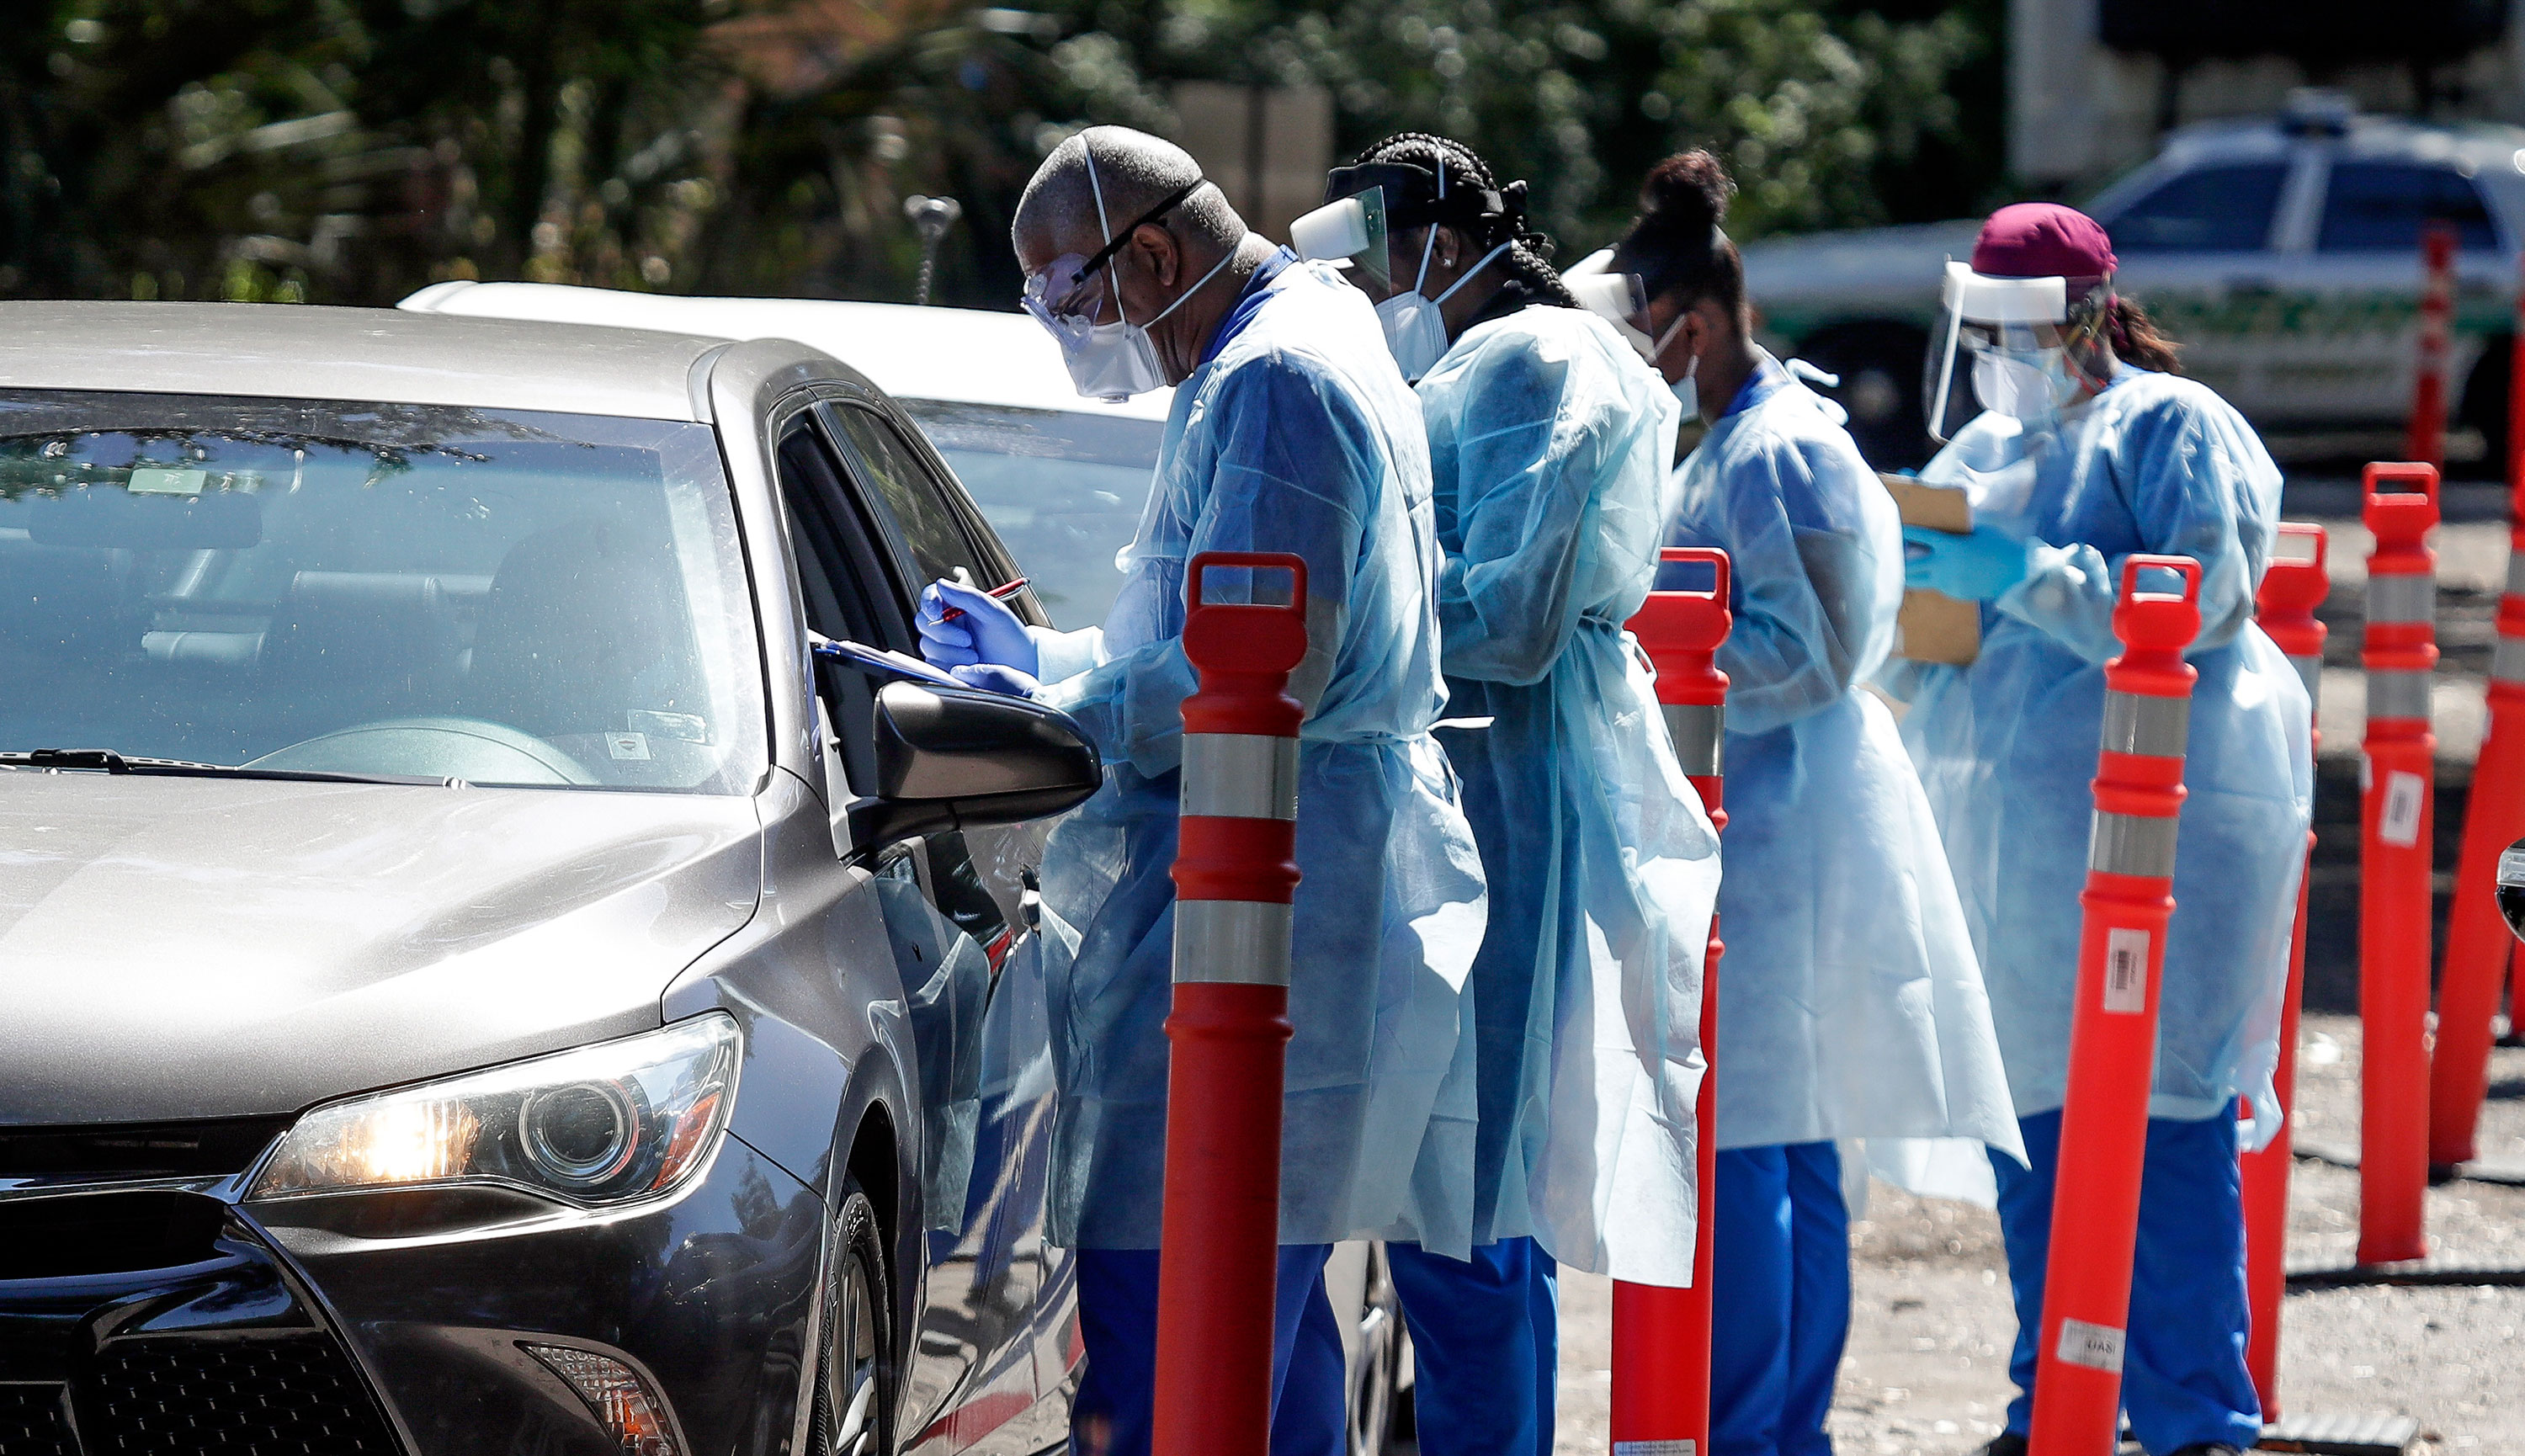 Health workers conduct Covid-19 tests at a drive-through testing site in Sanford, Florida on April 27.